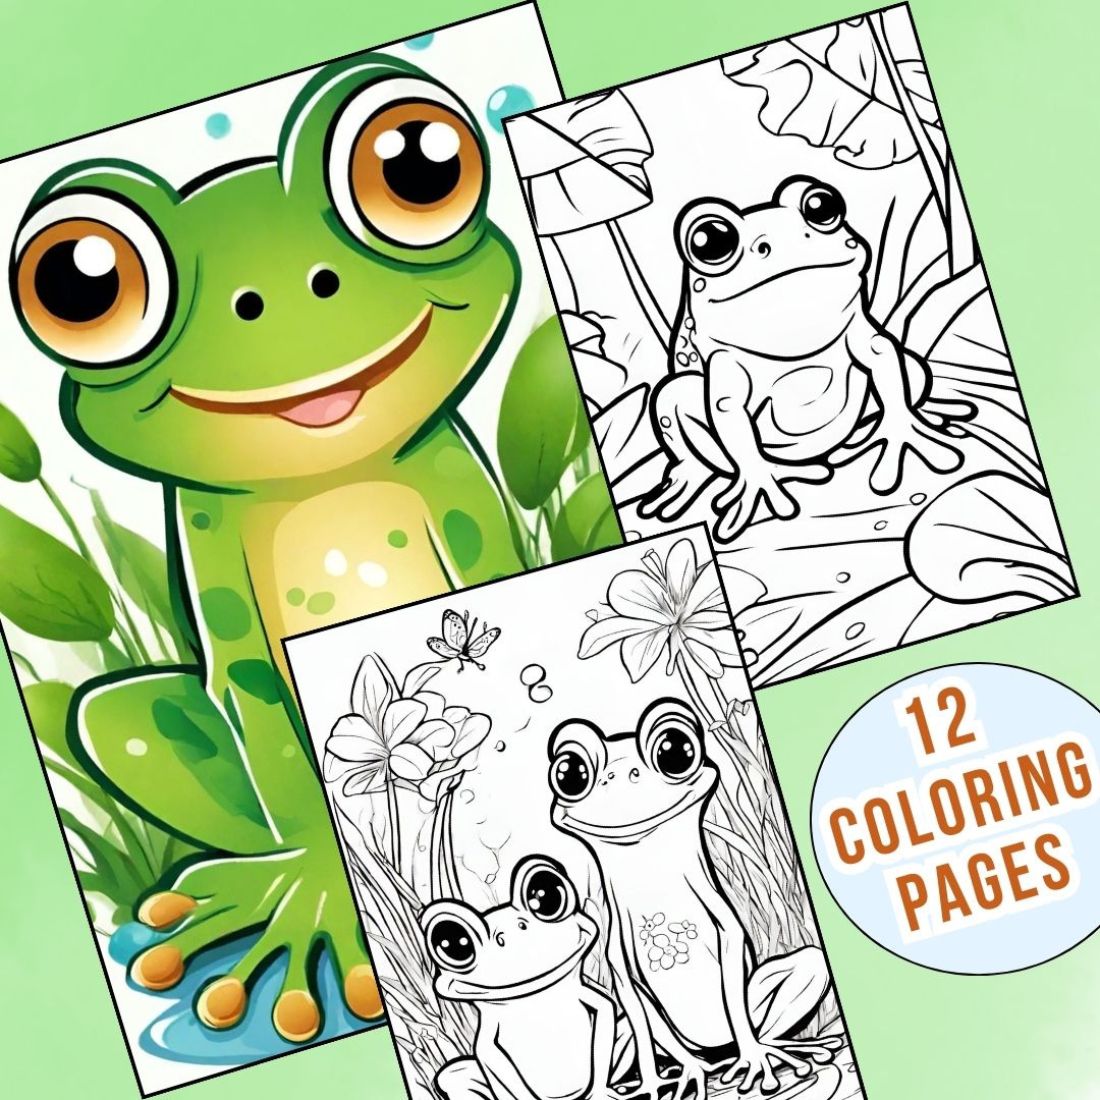 Froggy Coloring Adventure | 12 Relaxing and Calming Frog Coloring Pages for Kids cover image.